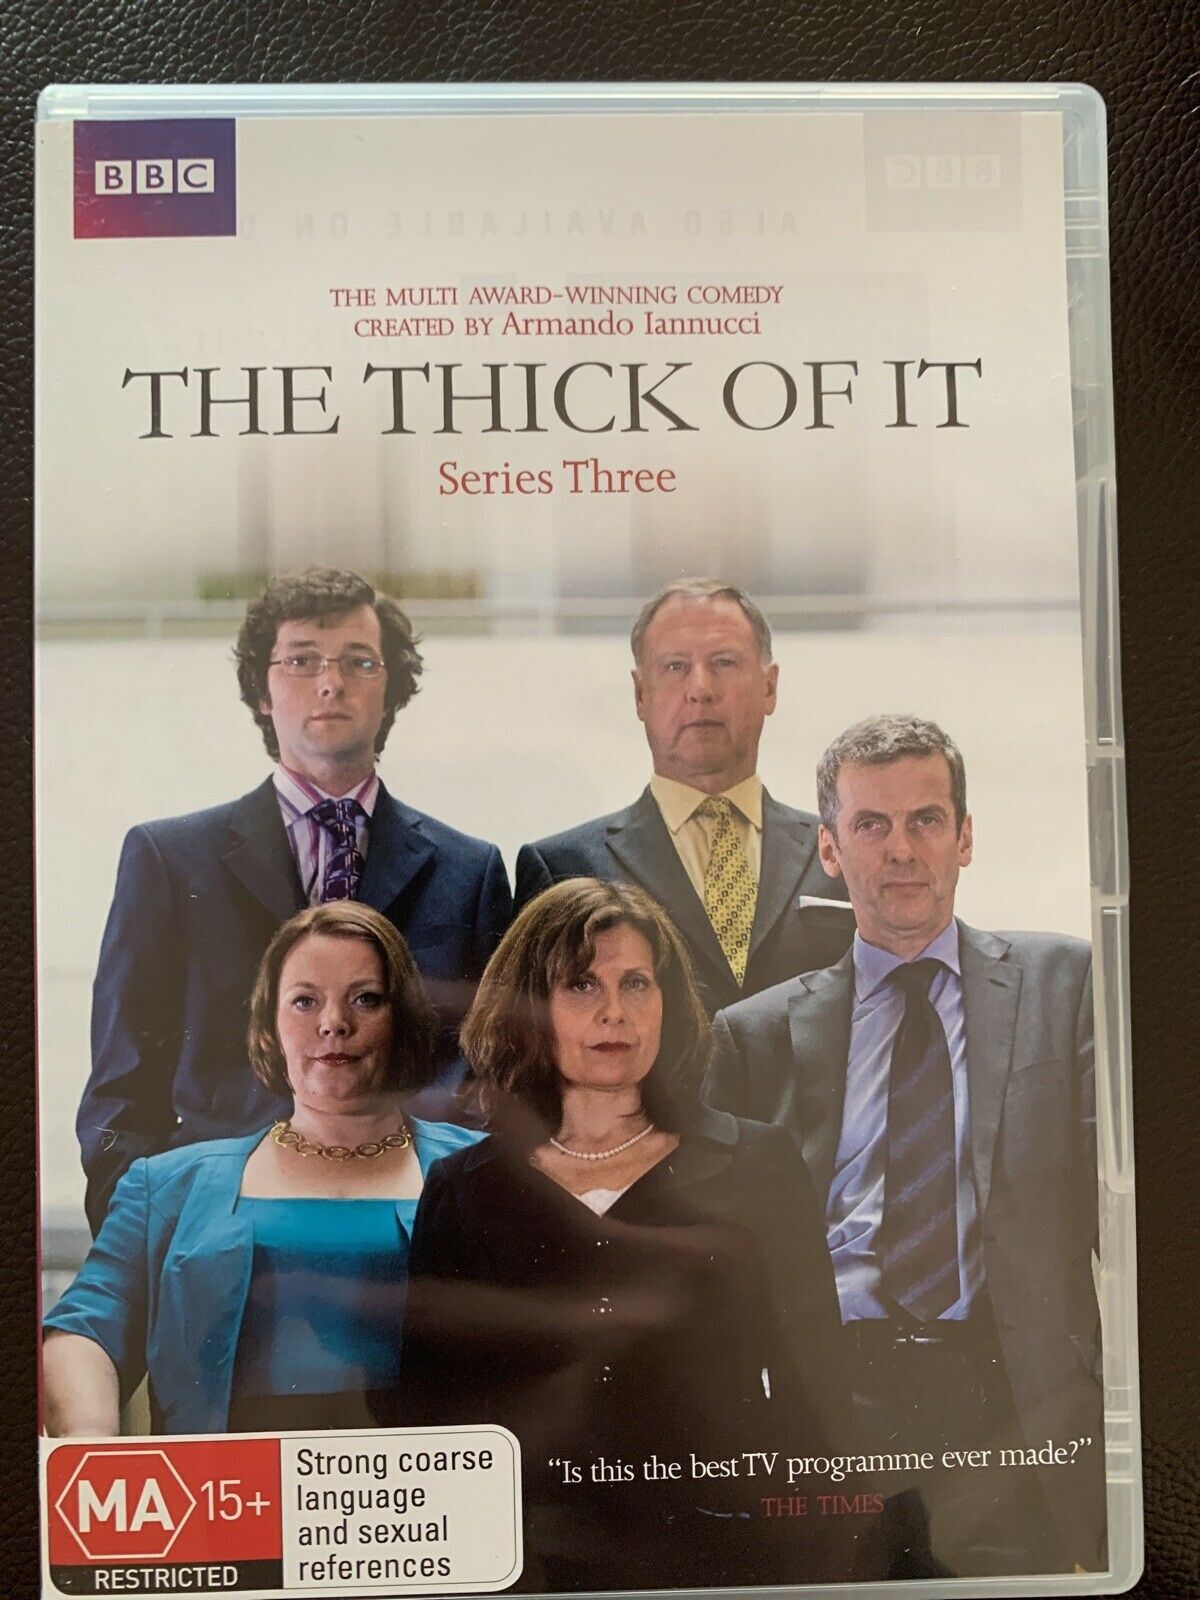 The Thick Of It : The Complete Series 1-4 (DVD, 2013, 8-Disc Set) Region 4